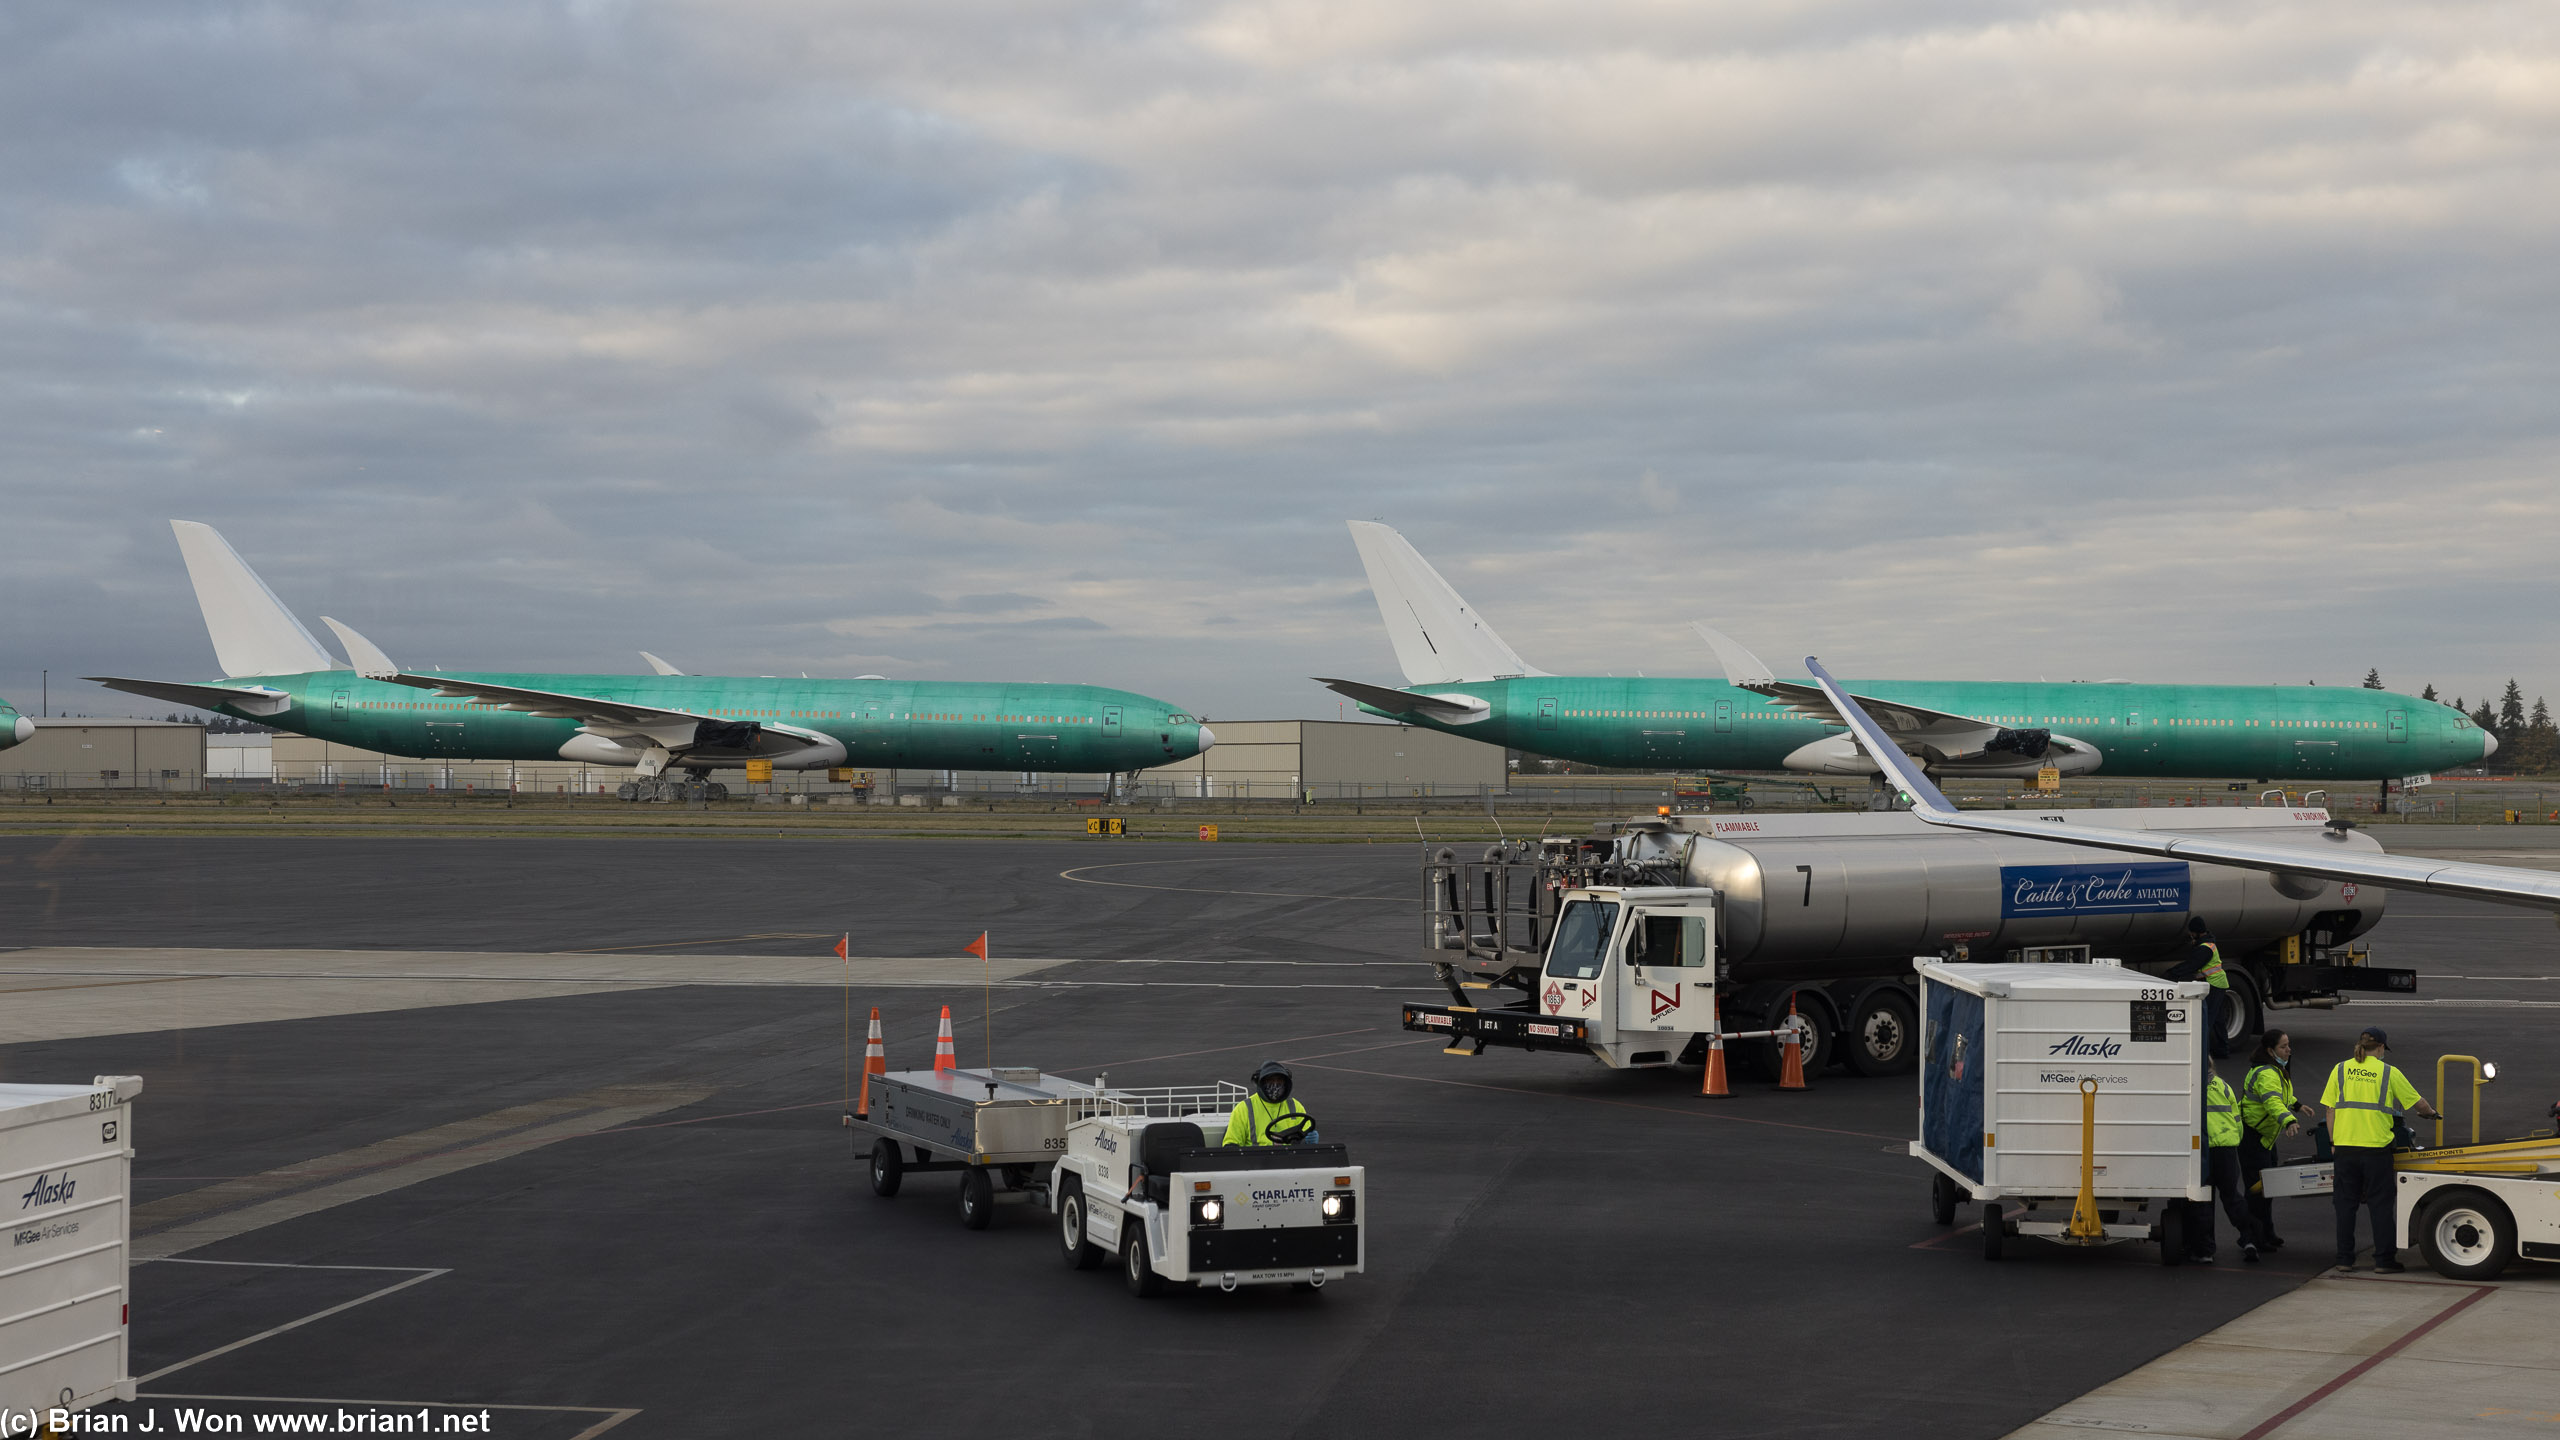 Shiny new 777-9X's in the background.